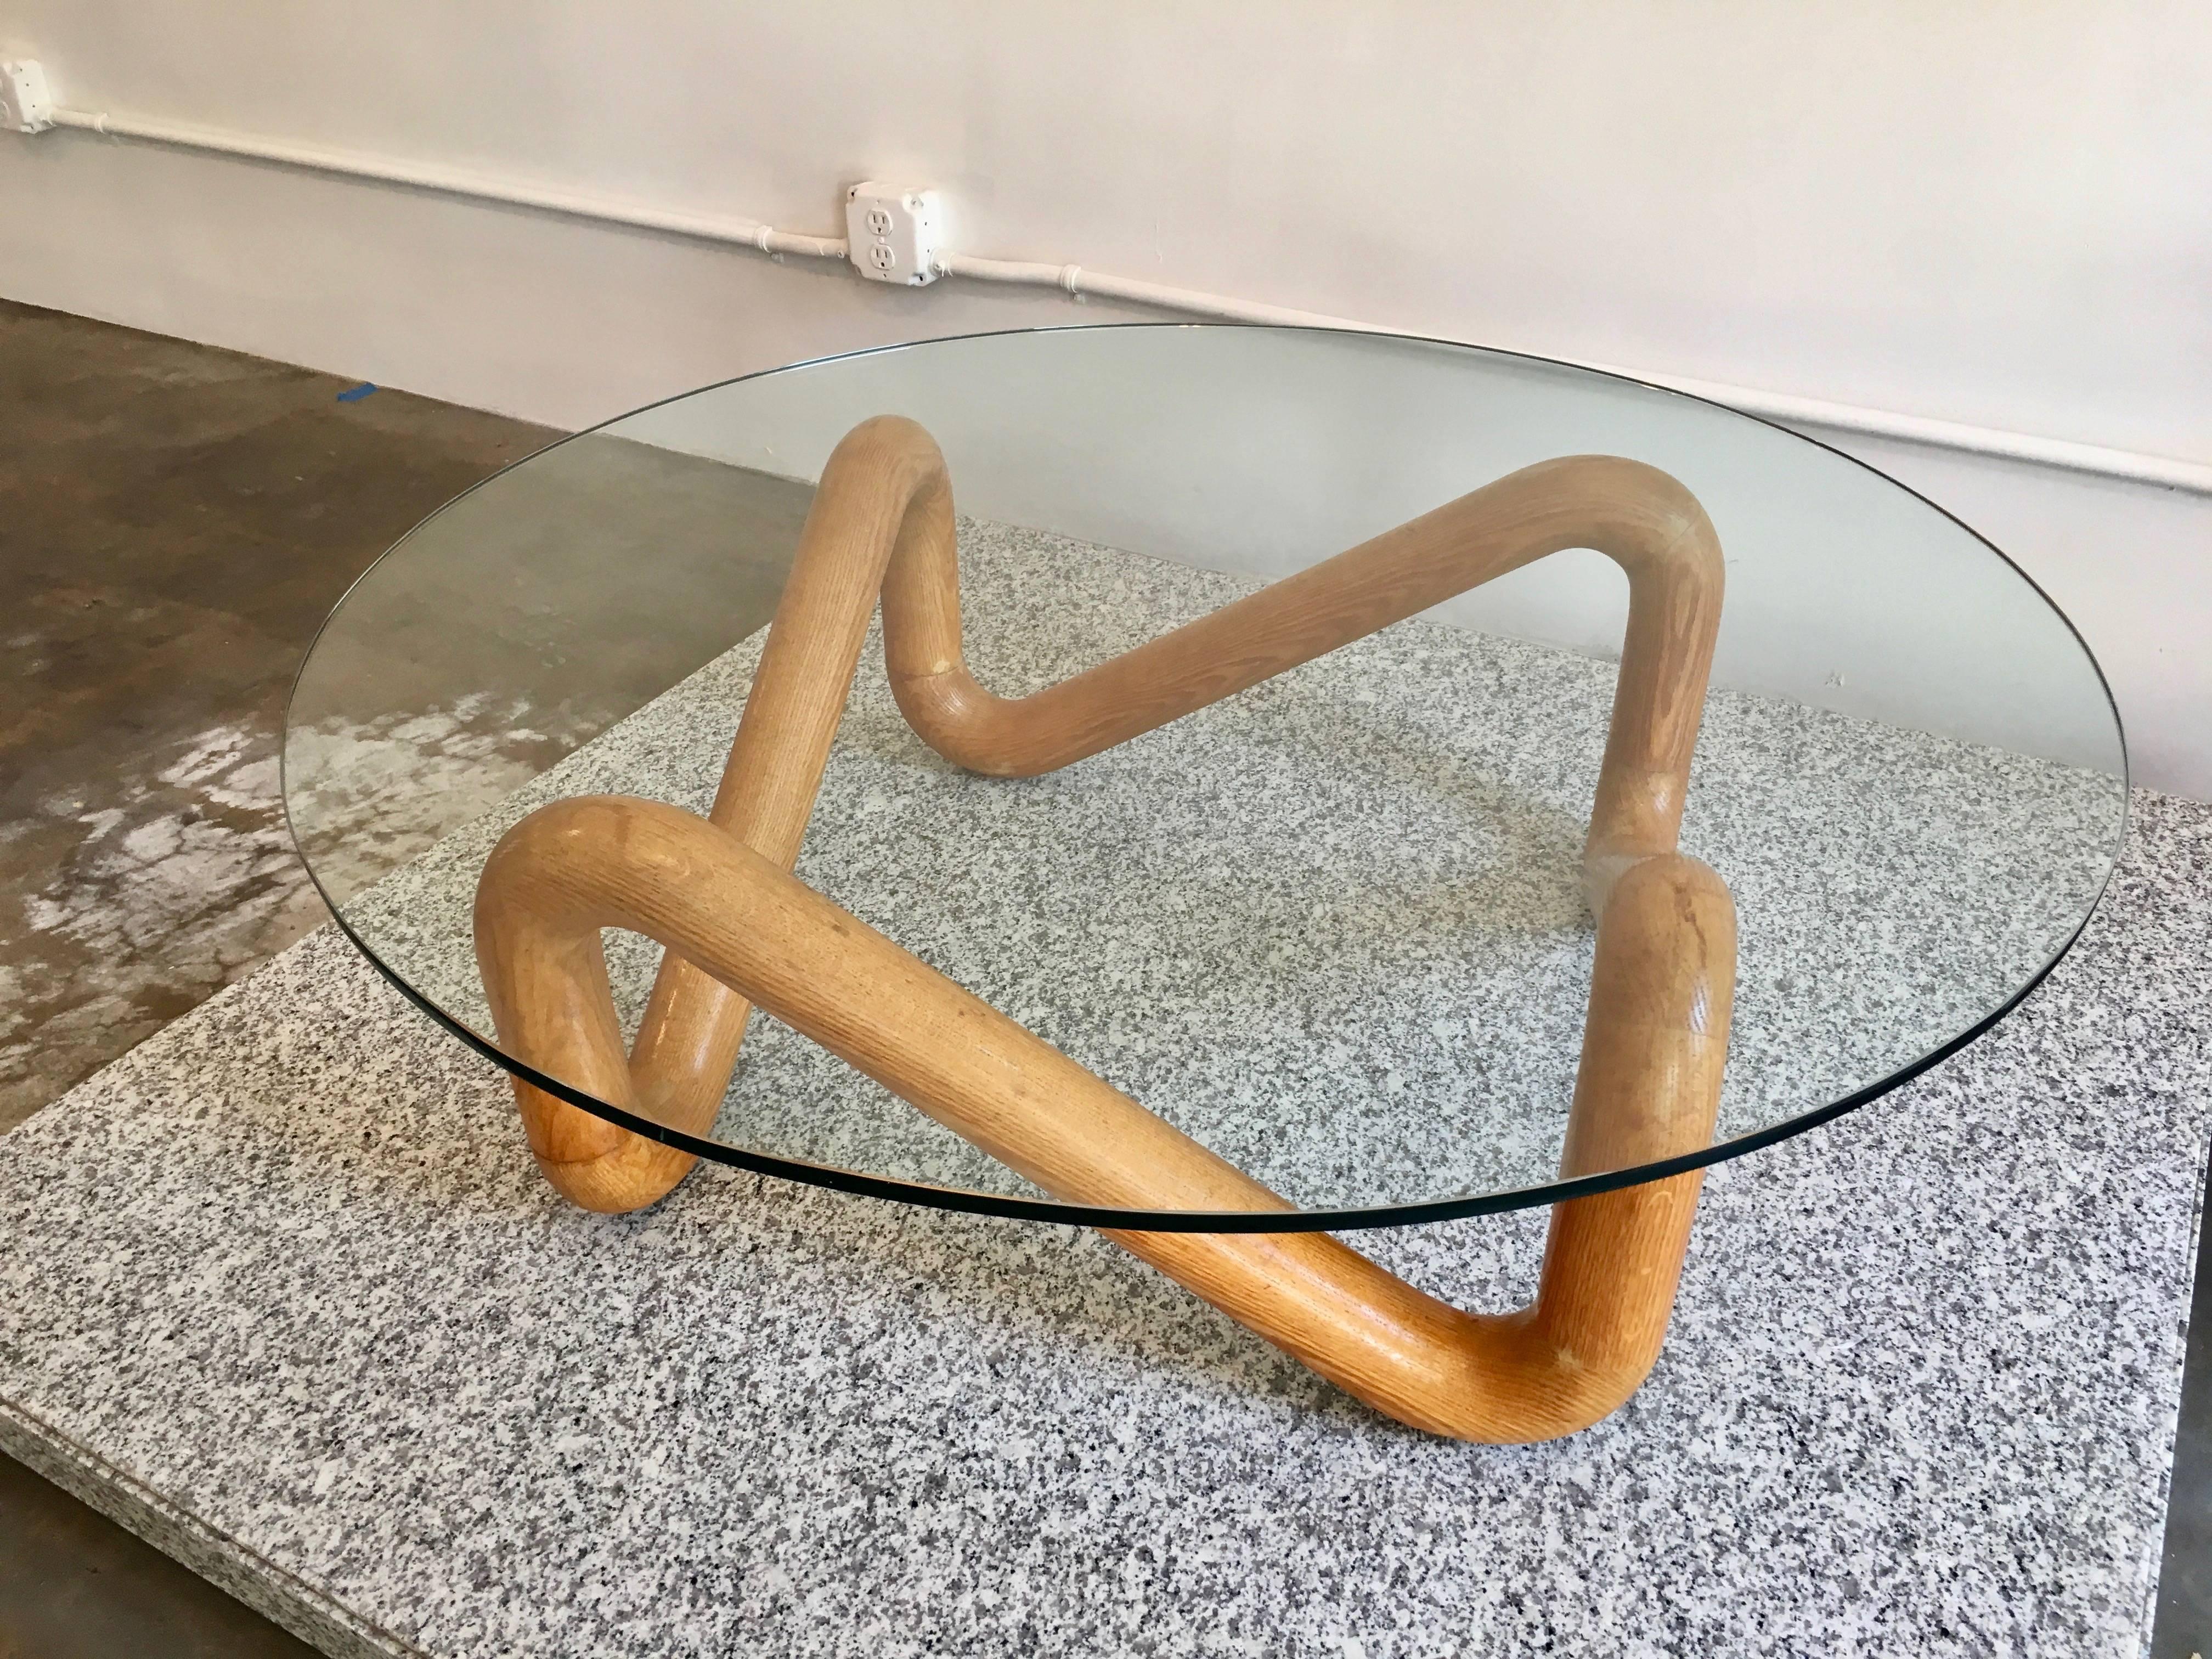 Exceptional sculptural Harvey Prober coffee table with knotted form solid oak base and plate glass top. A remarkable early and scarce biomorphic design by Probber and documented in the 1952 